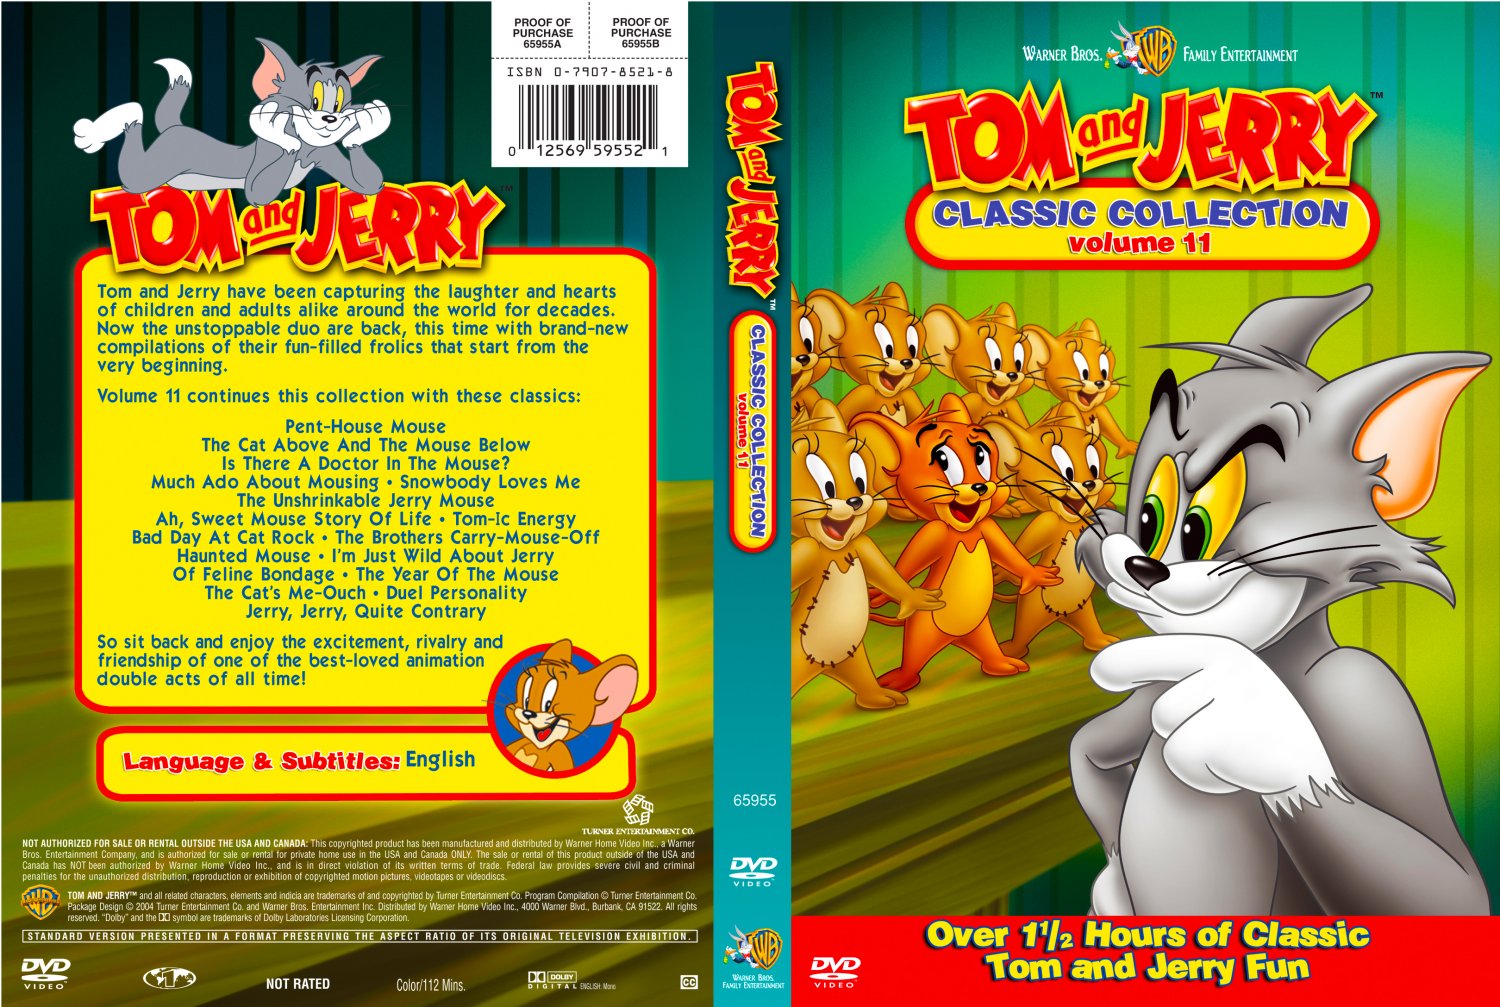 Tom And Jerry Classic Collection - Volume 11